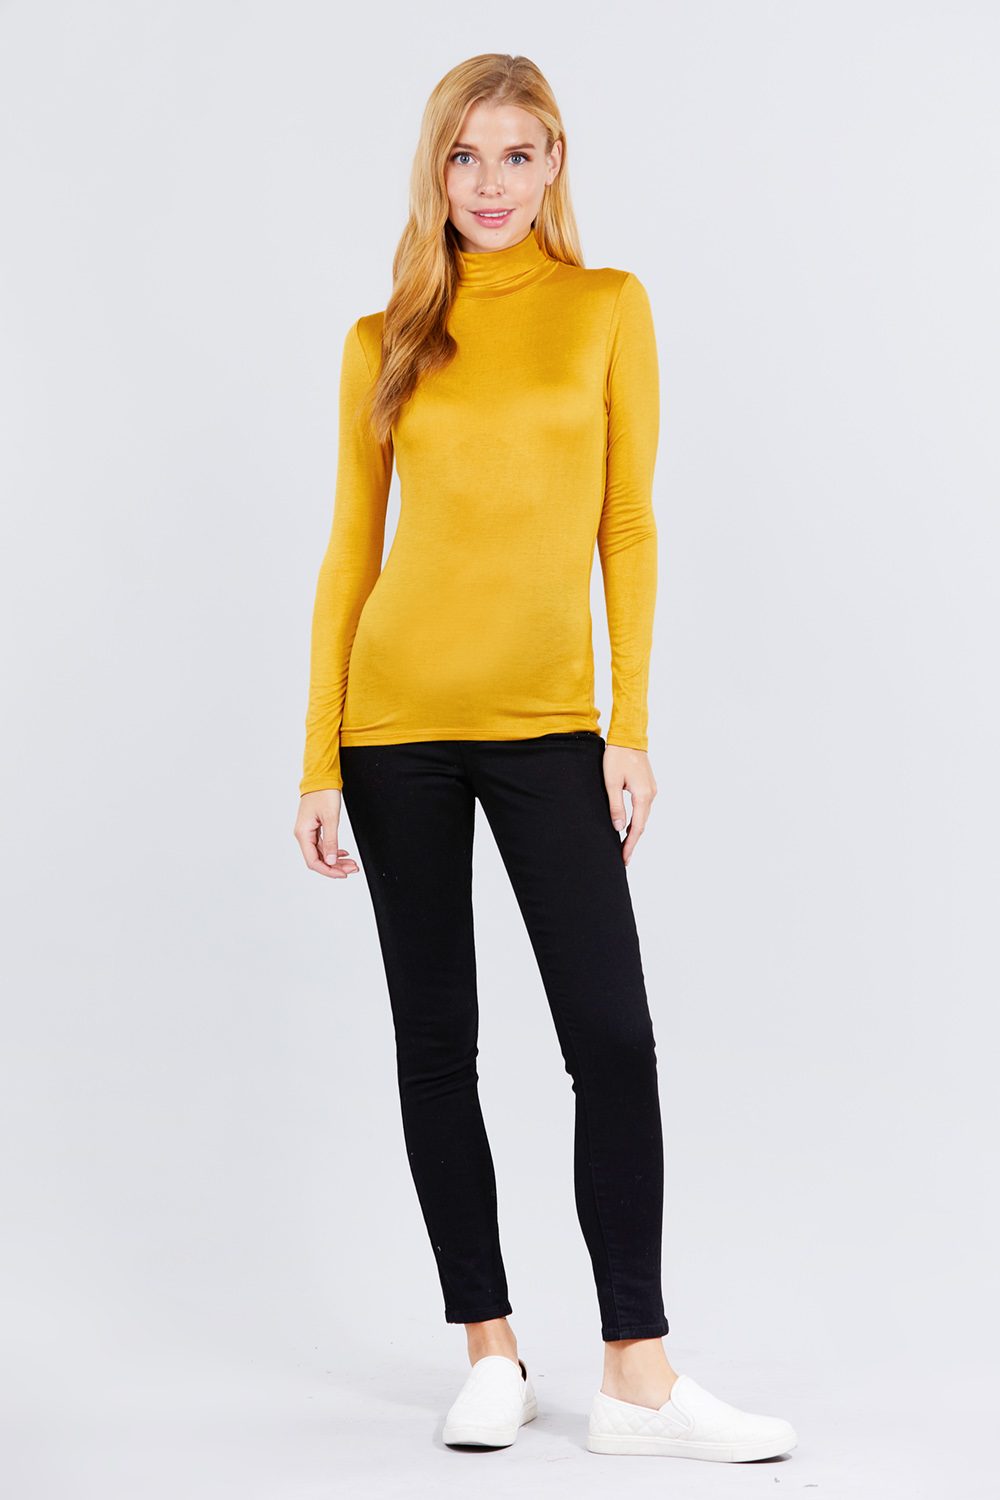 Turtle Neck Rayon Jersey Top Turtle Neck Rayon Jersey Top - M&R CORNER M&R CORNER